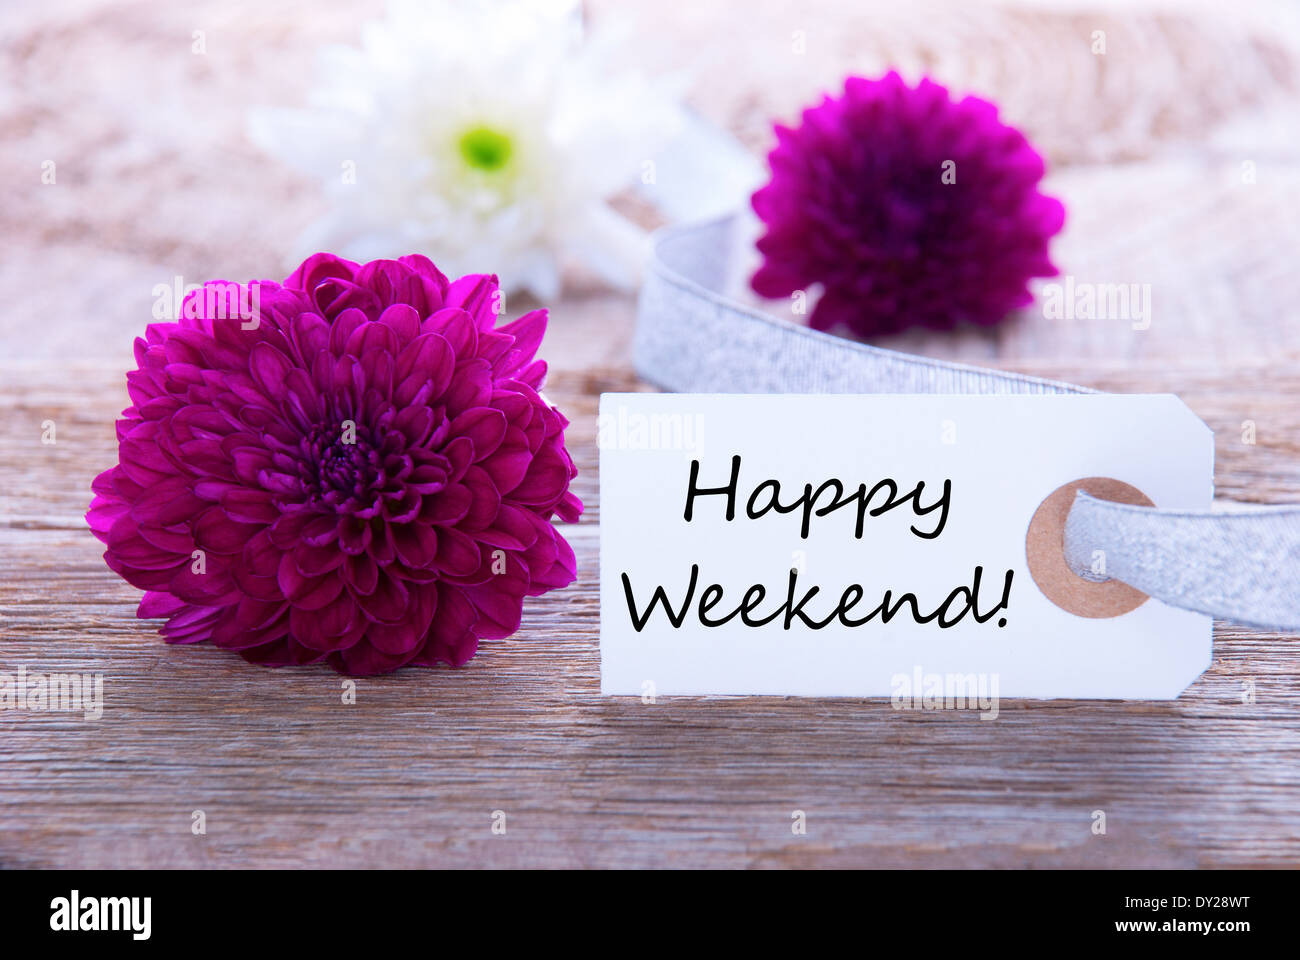 Label with Happy Weekend and Purple Flowers in the Background ...